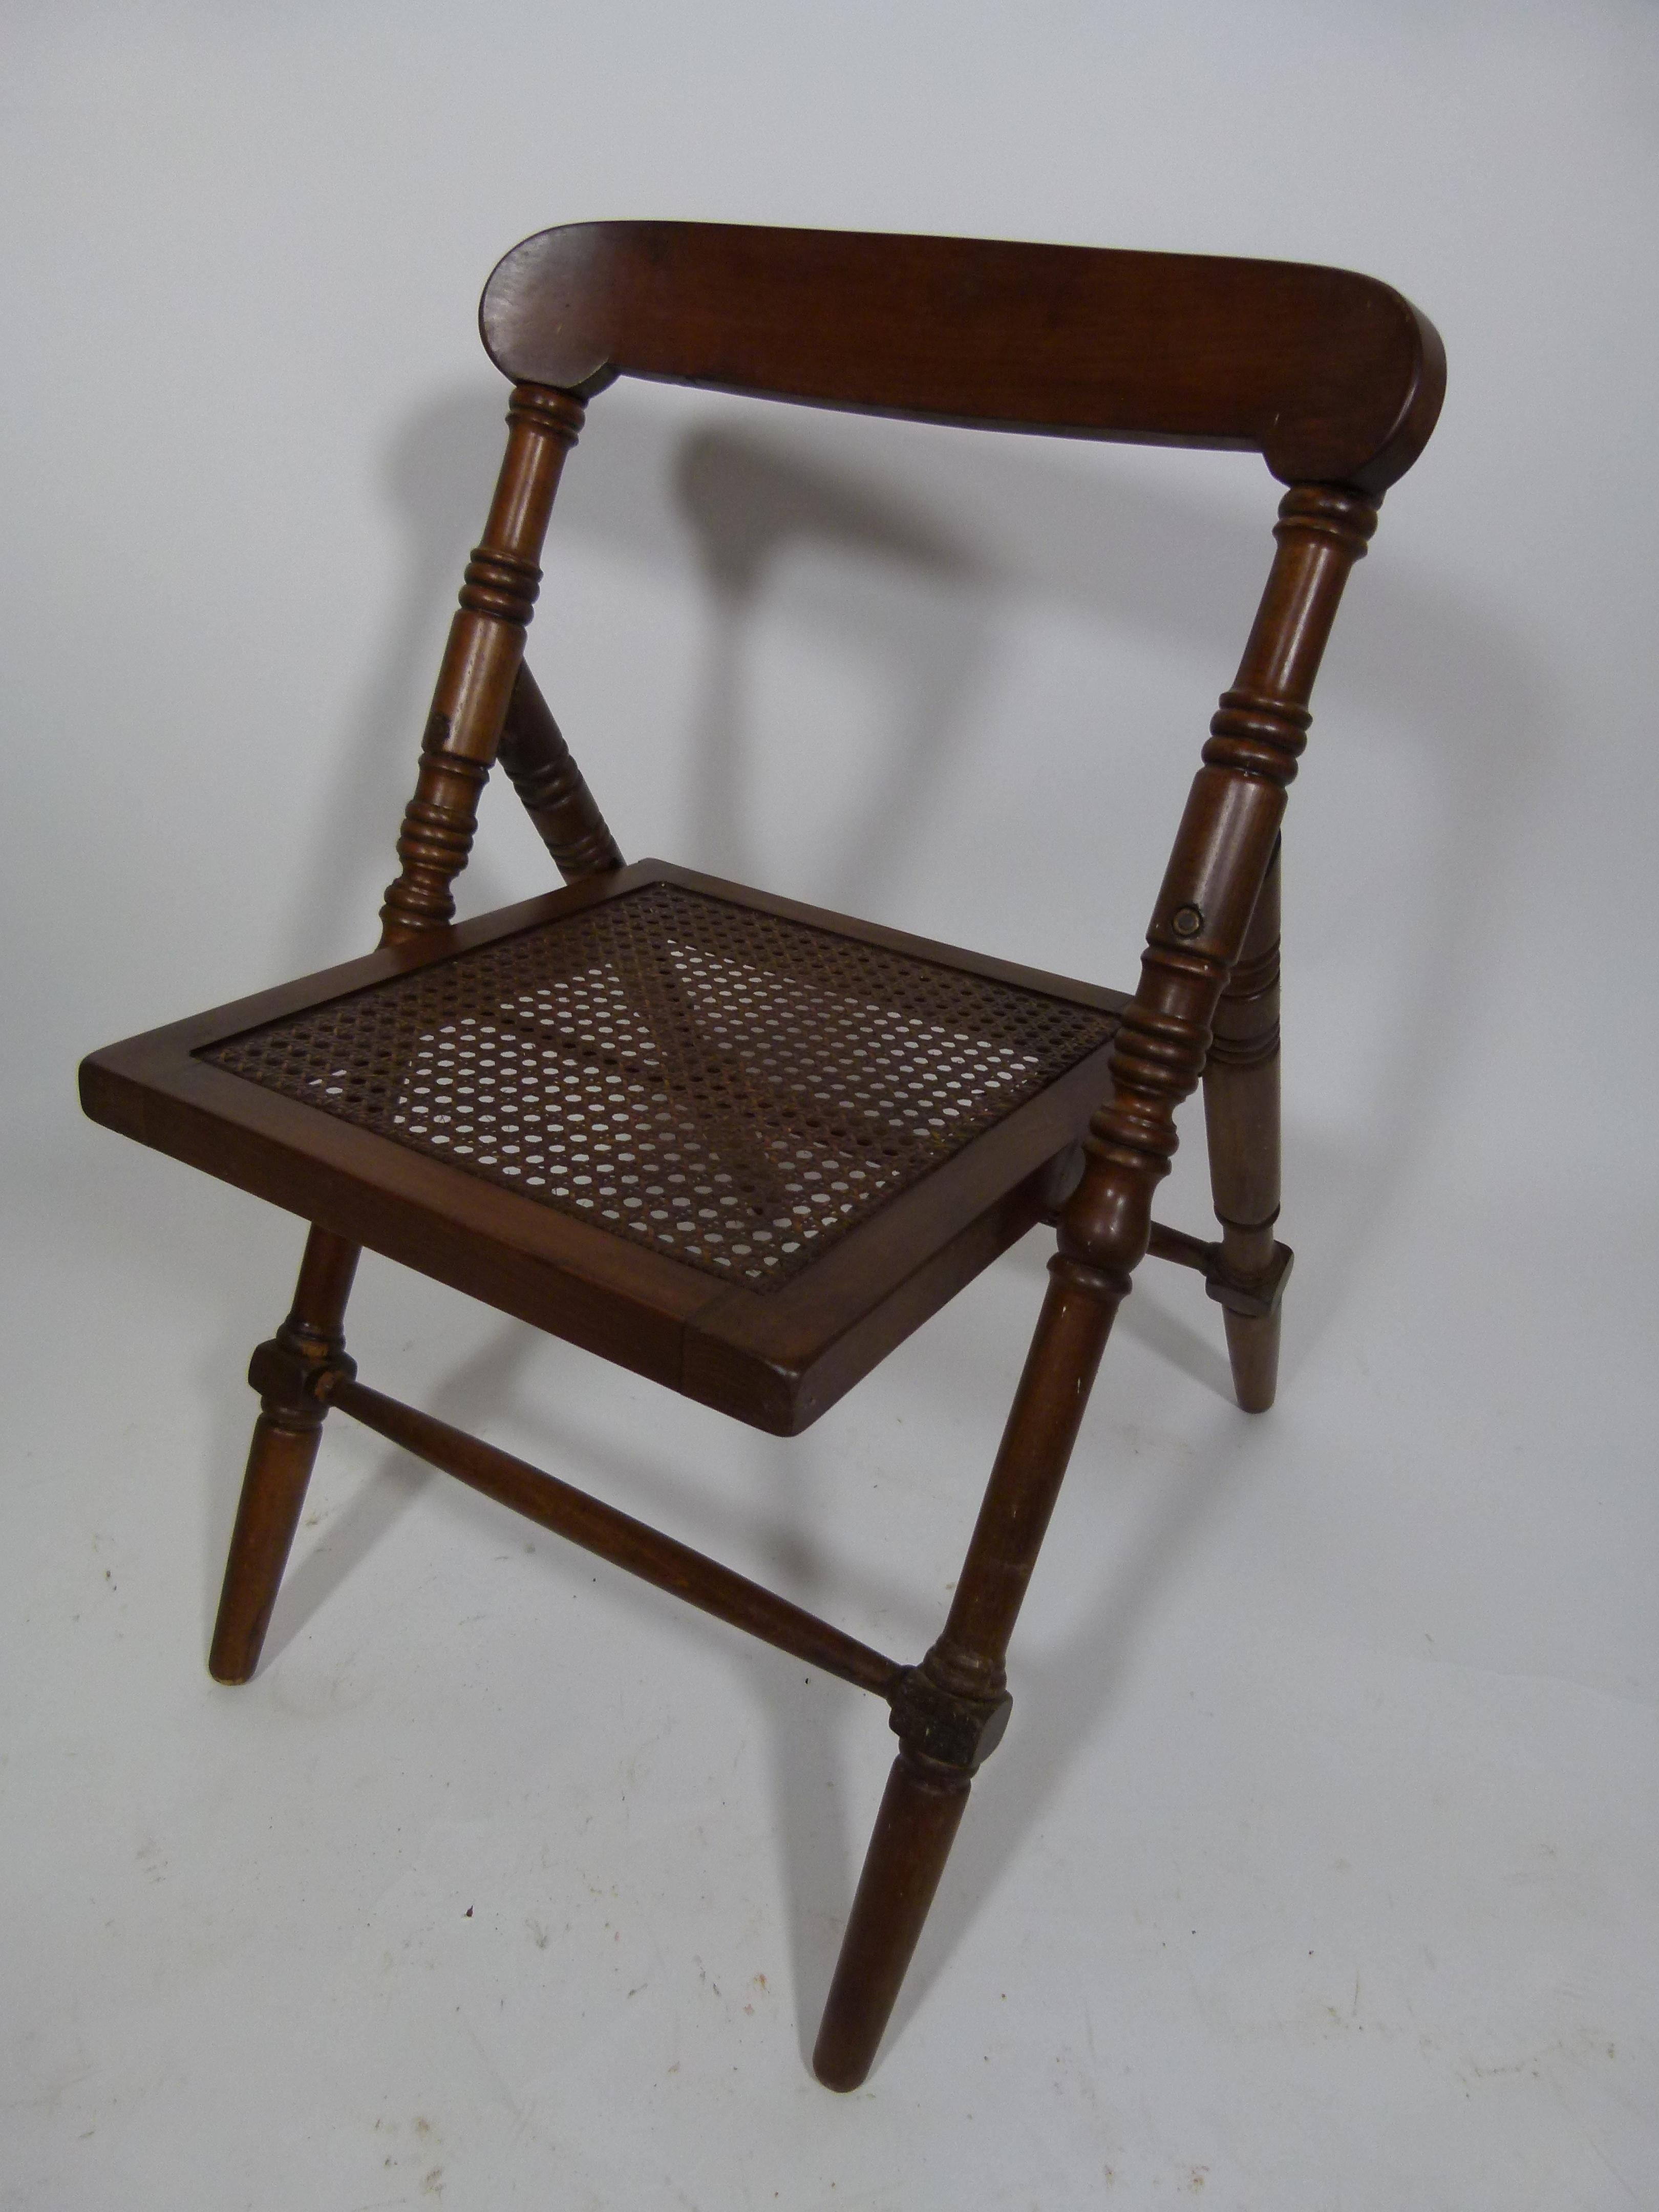 Folding chair from the early 20th century. Black varnished wood and gridded seat.
On the wood seat's frame there is the Manufacture's logo: 